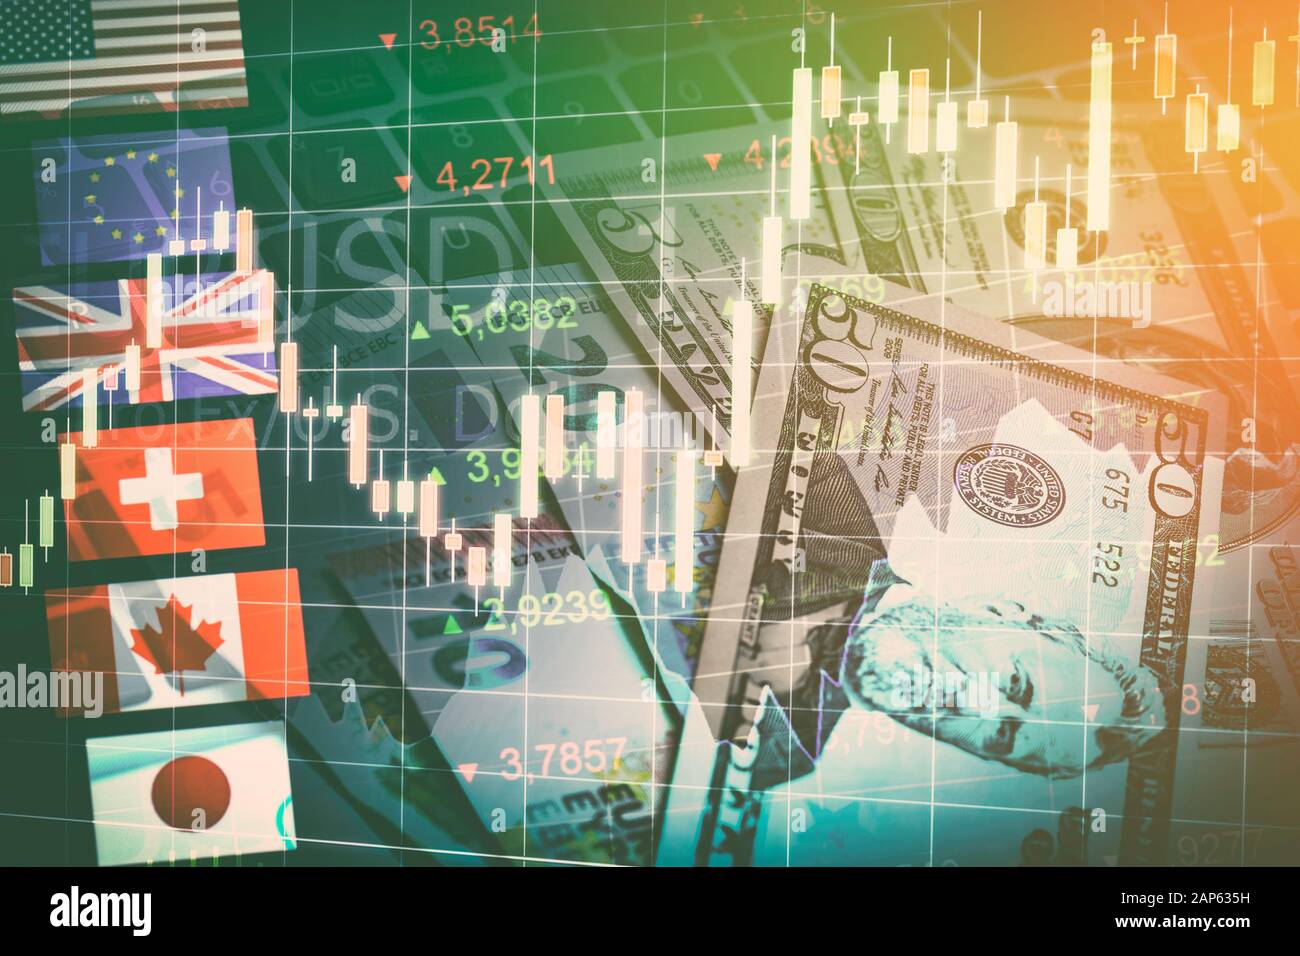 Forex Markets Currency Trading Global Economy Concept. United Kingdon Pund, European Euro, American and Canadian Dollar, Japanese Yen Currency Stock Photo